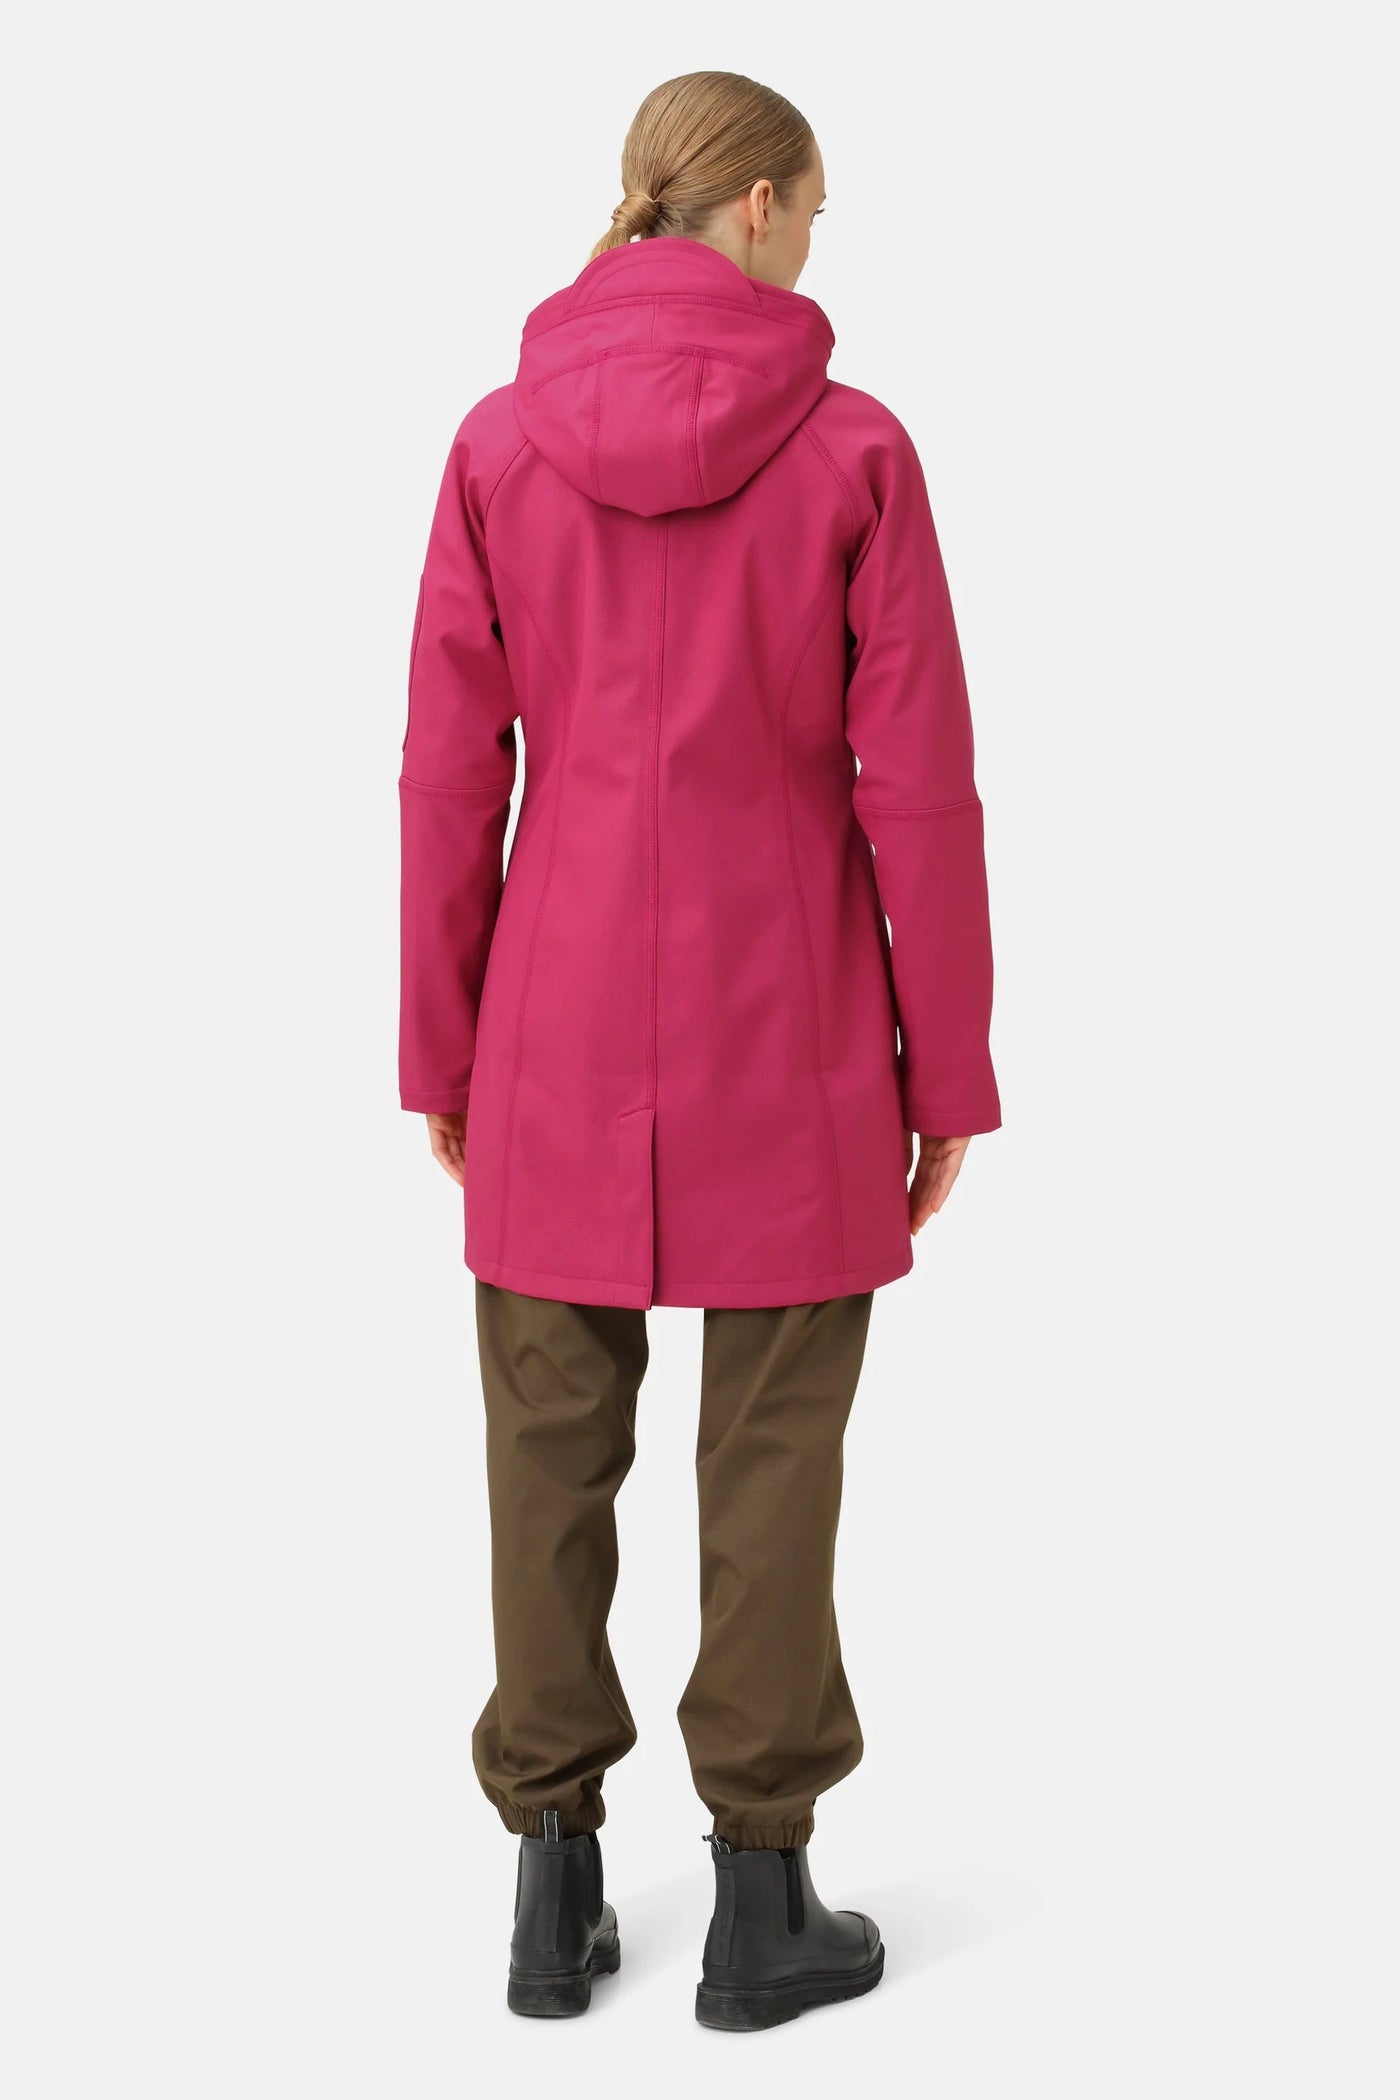 Ilse Jacobsen Rain37 in Sangria-Womens-Ohh! By Gum - Shop Sustainable